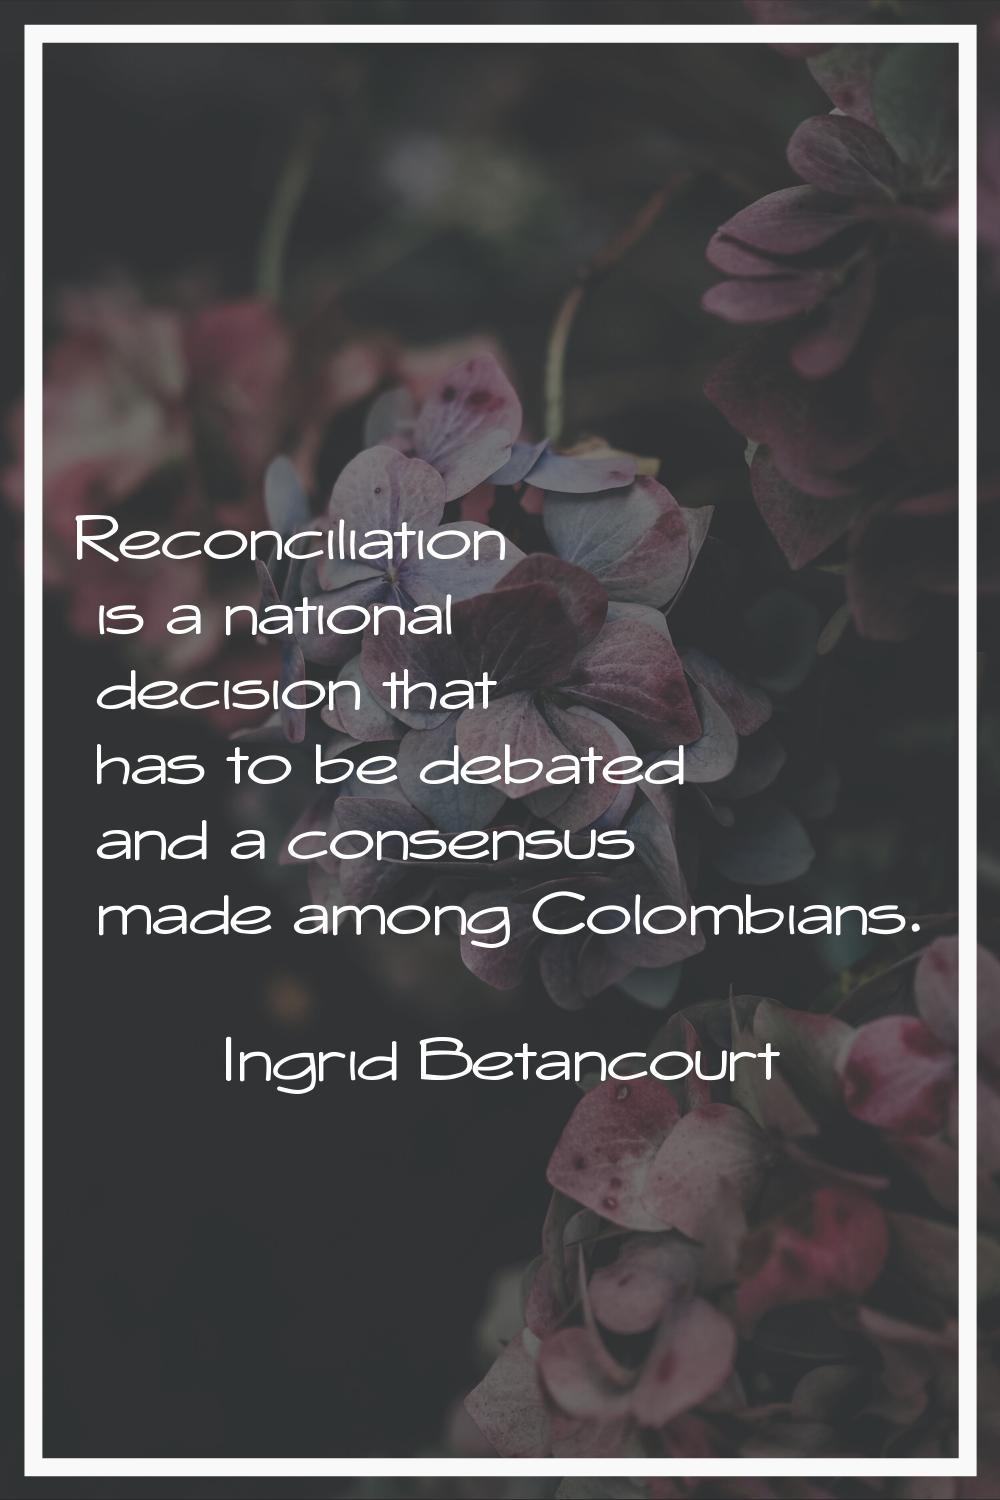 Reconciliation is a national decision that has to be debated and a consensus made among Colombians.